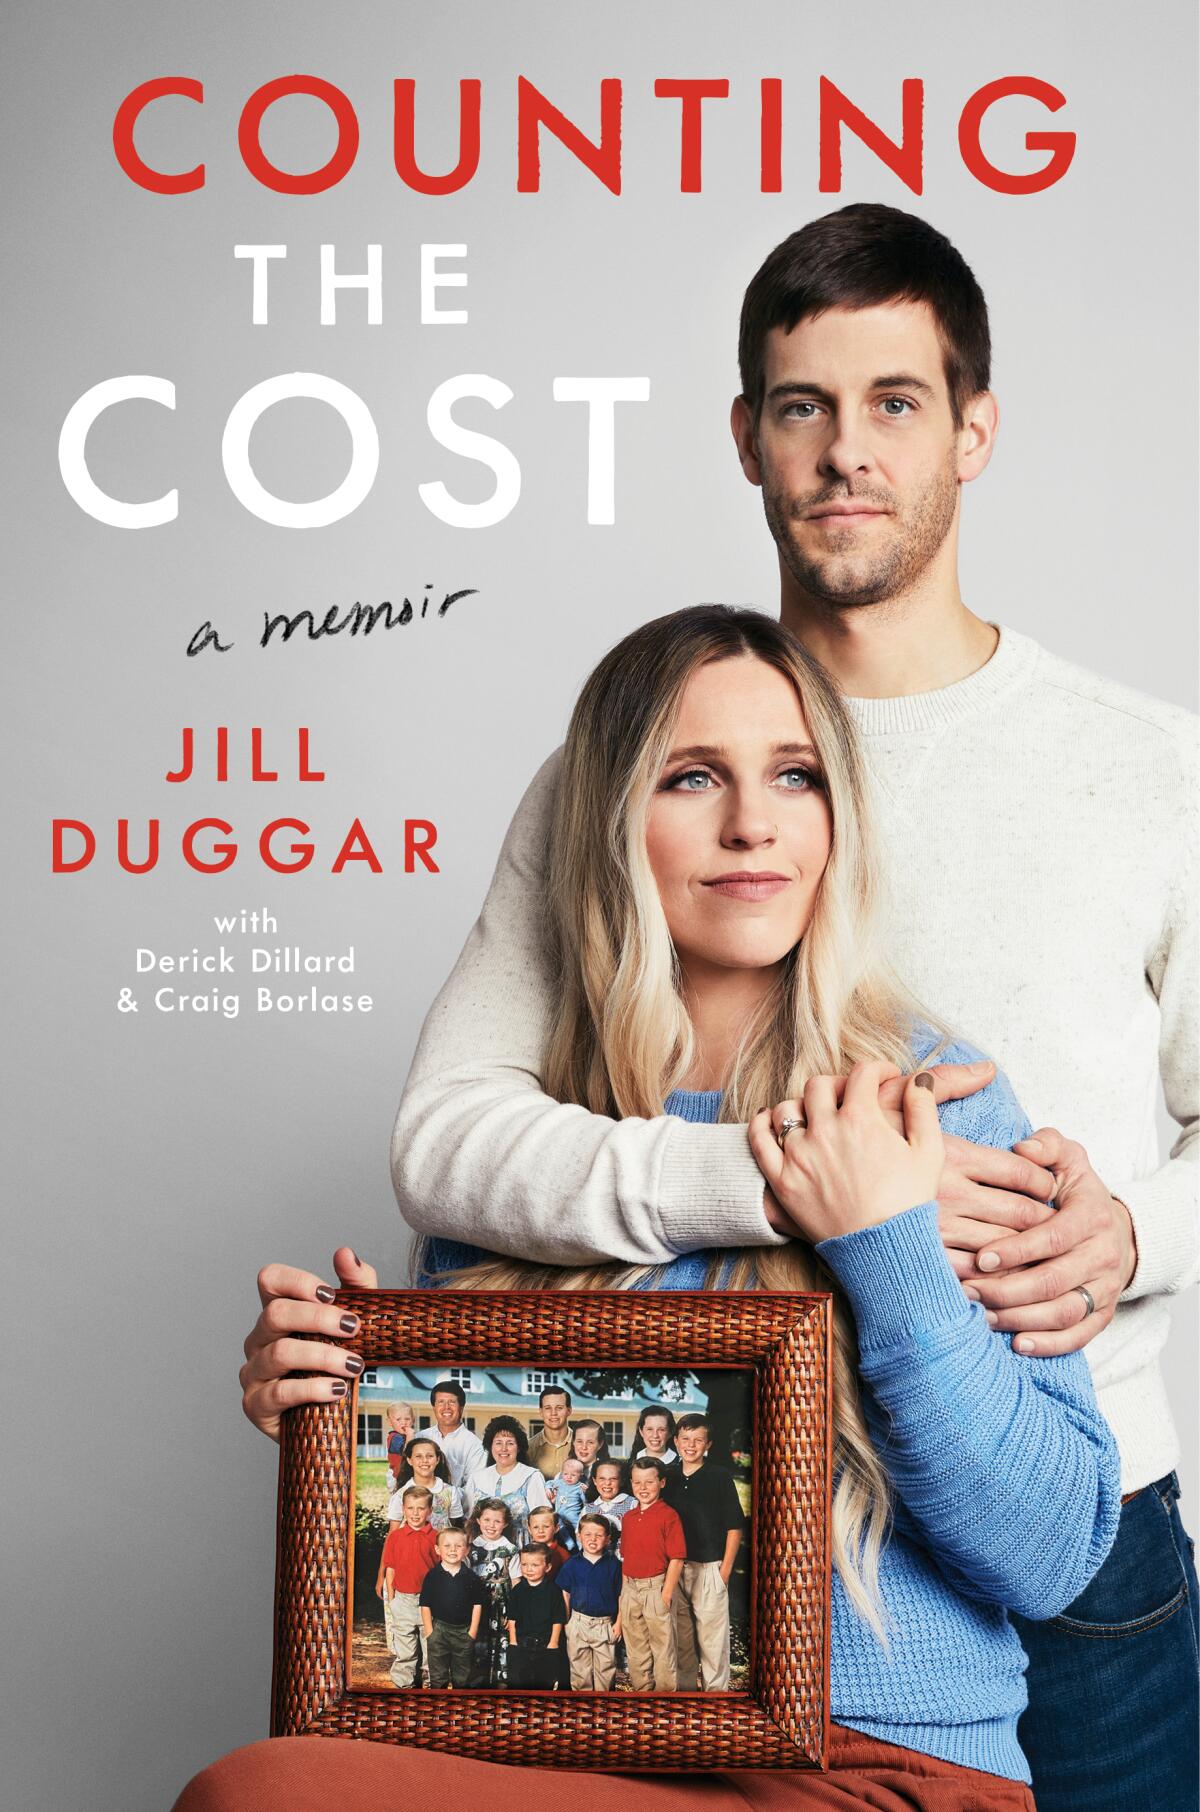 Jill Duggar's memoir, "Counting the Cost," explores the toxic side of reality TV.